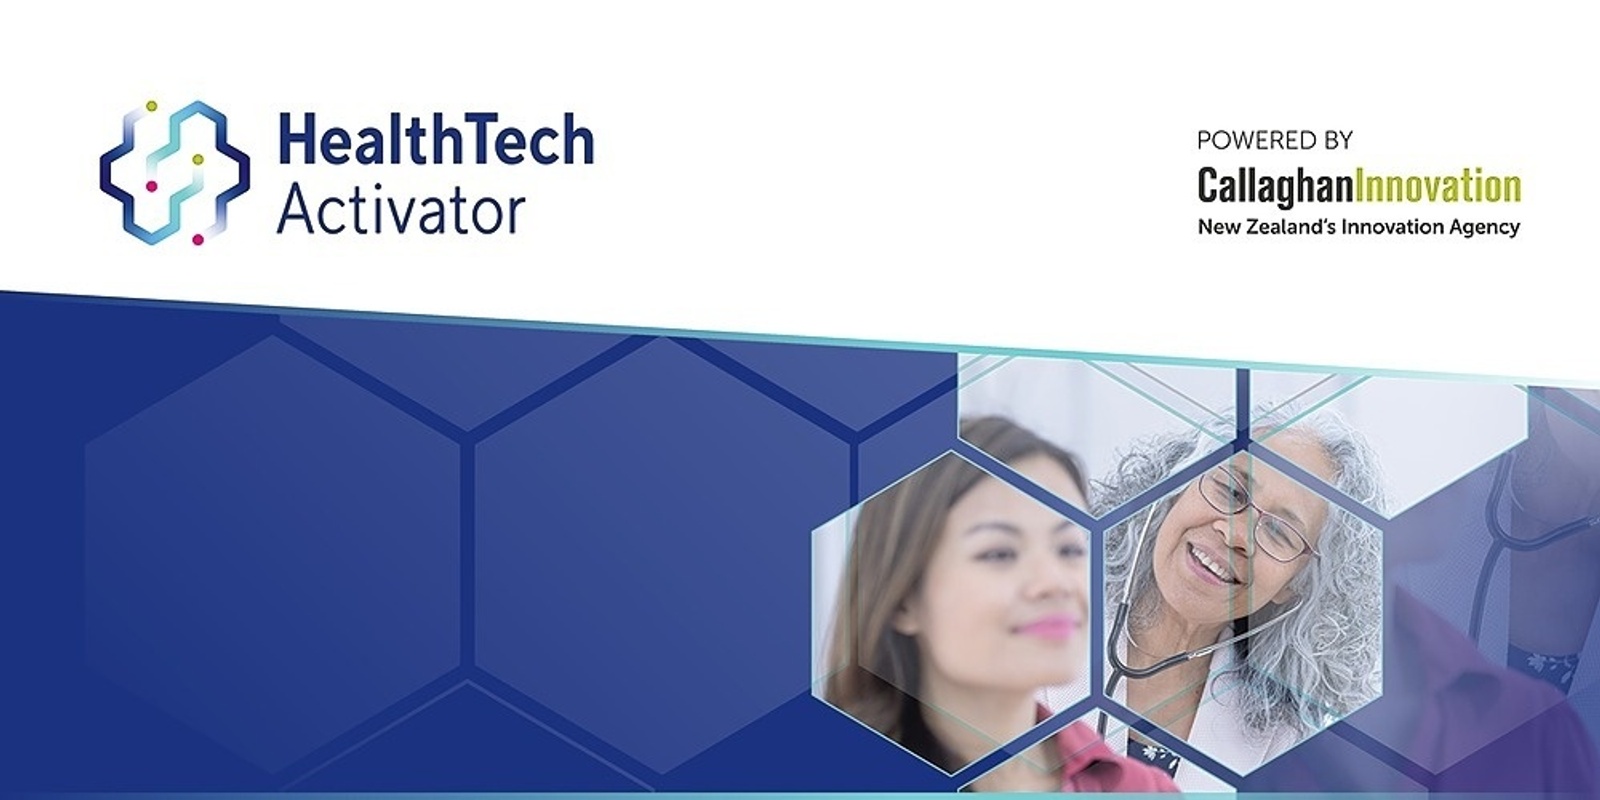 HealthTech Activator workshop - Increasing the Value of your Healthtech Company